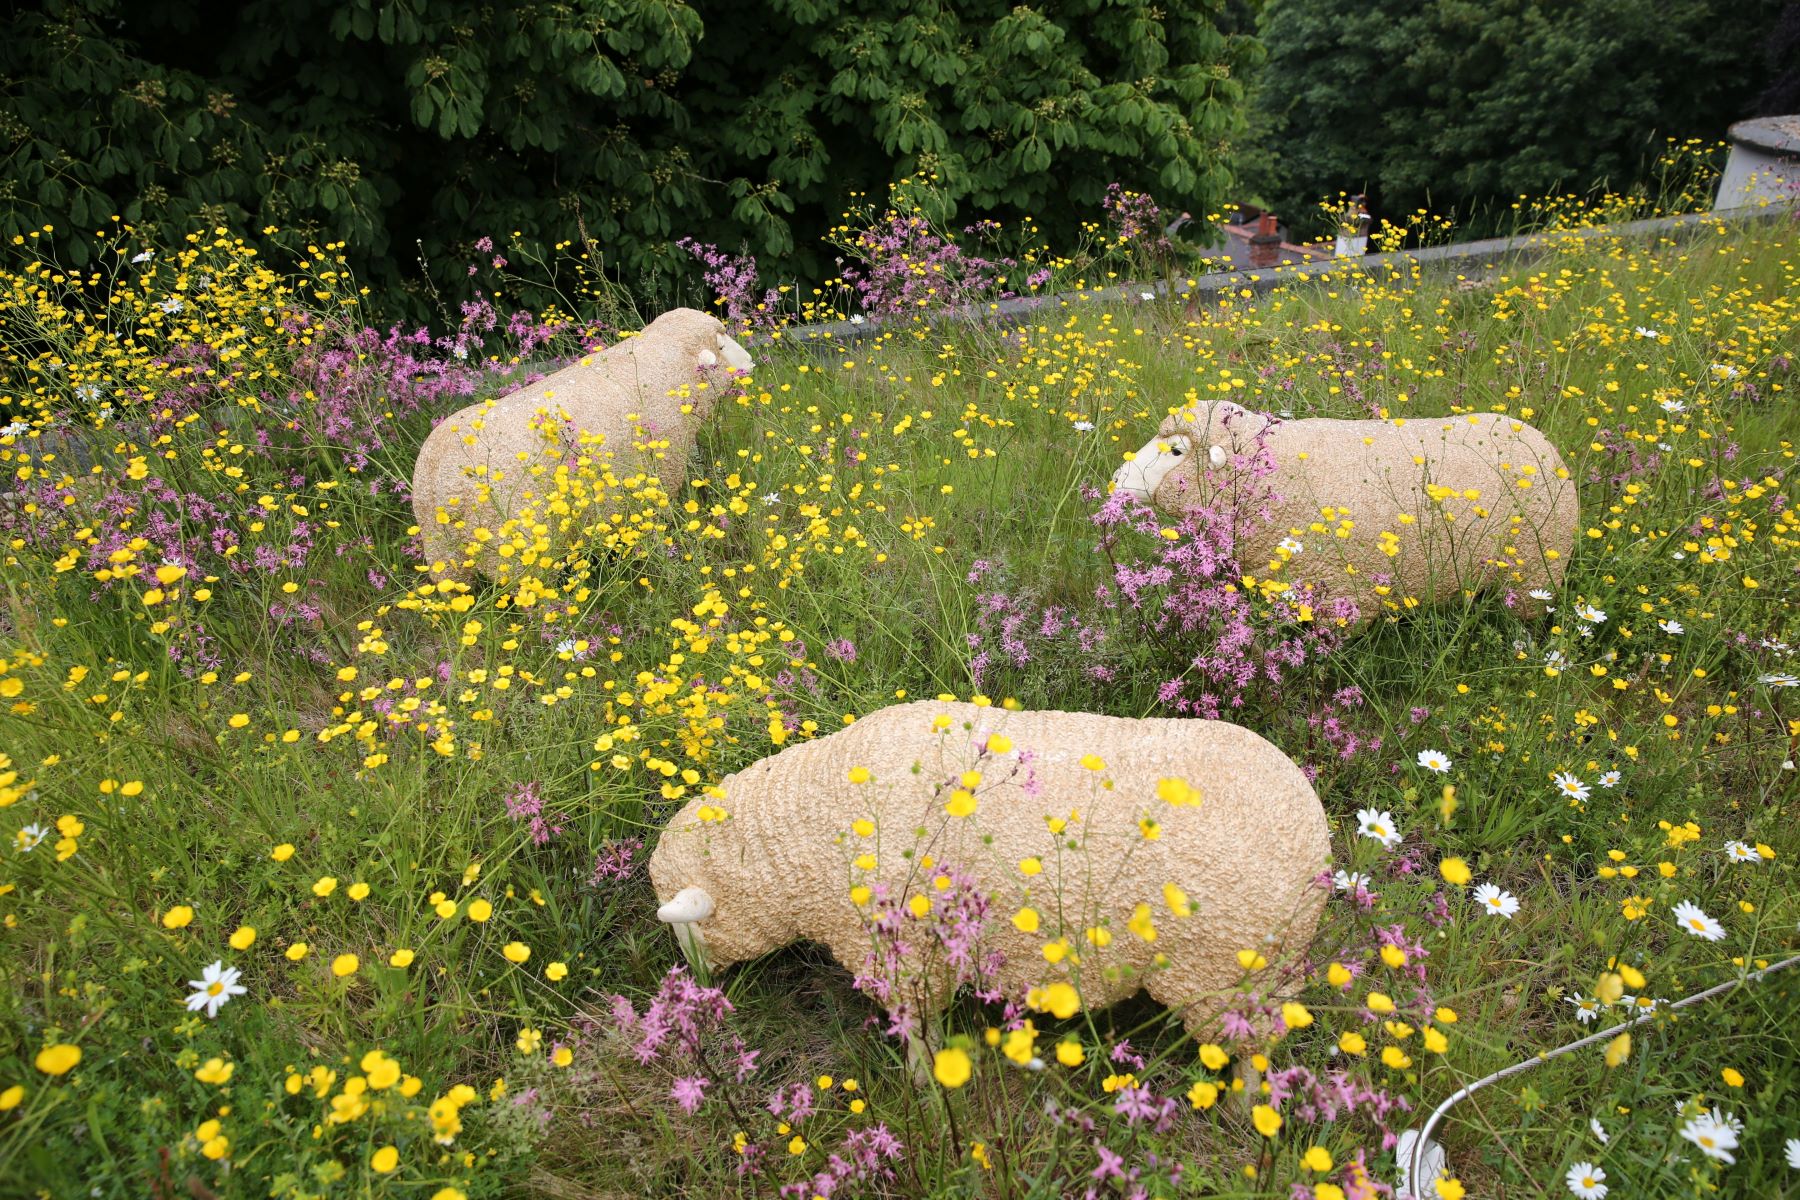 Model sheep on green roof with wildflowers